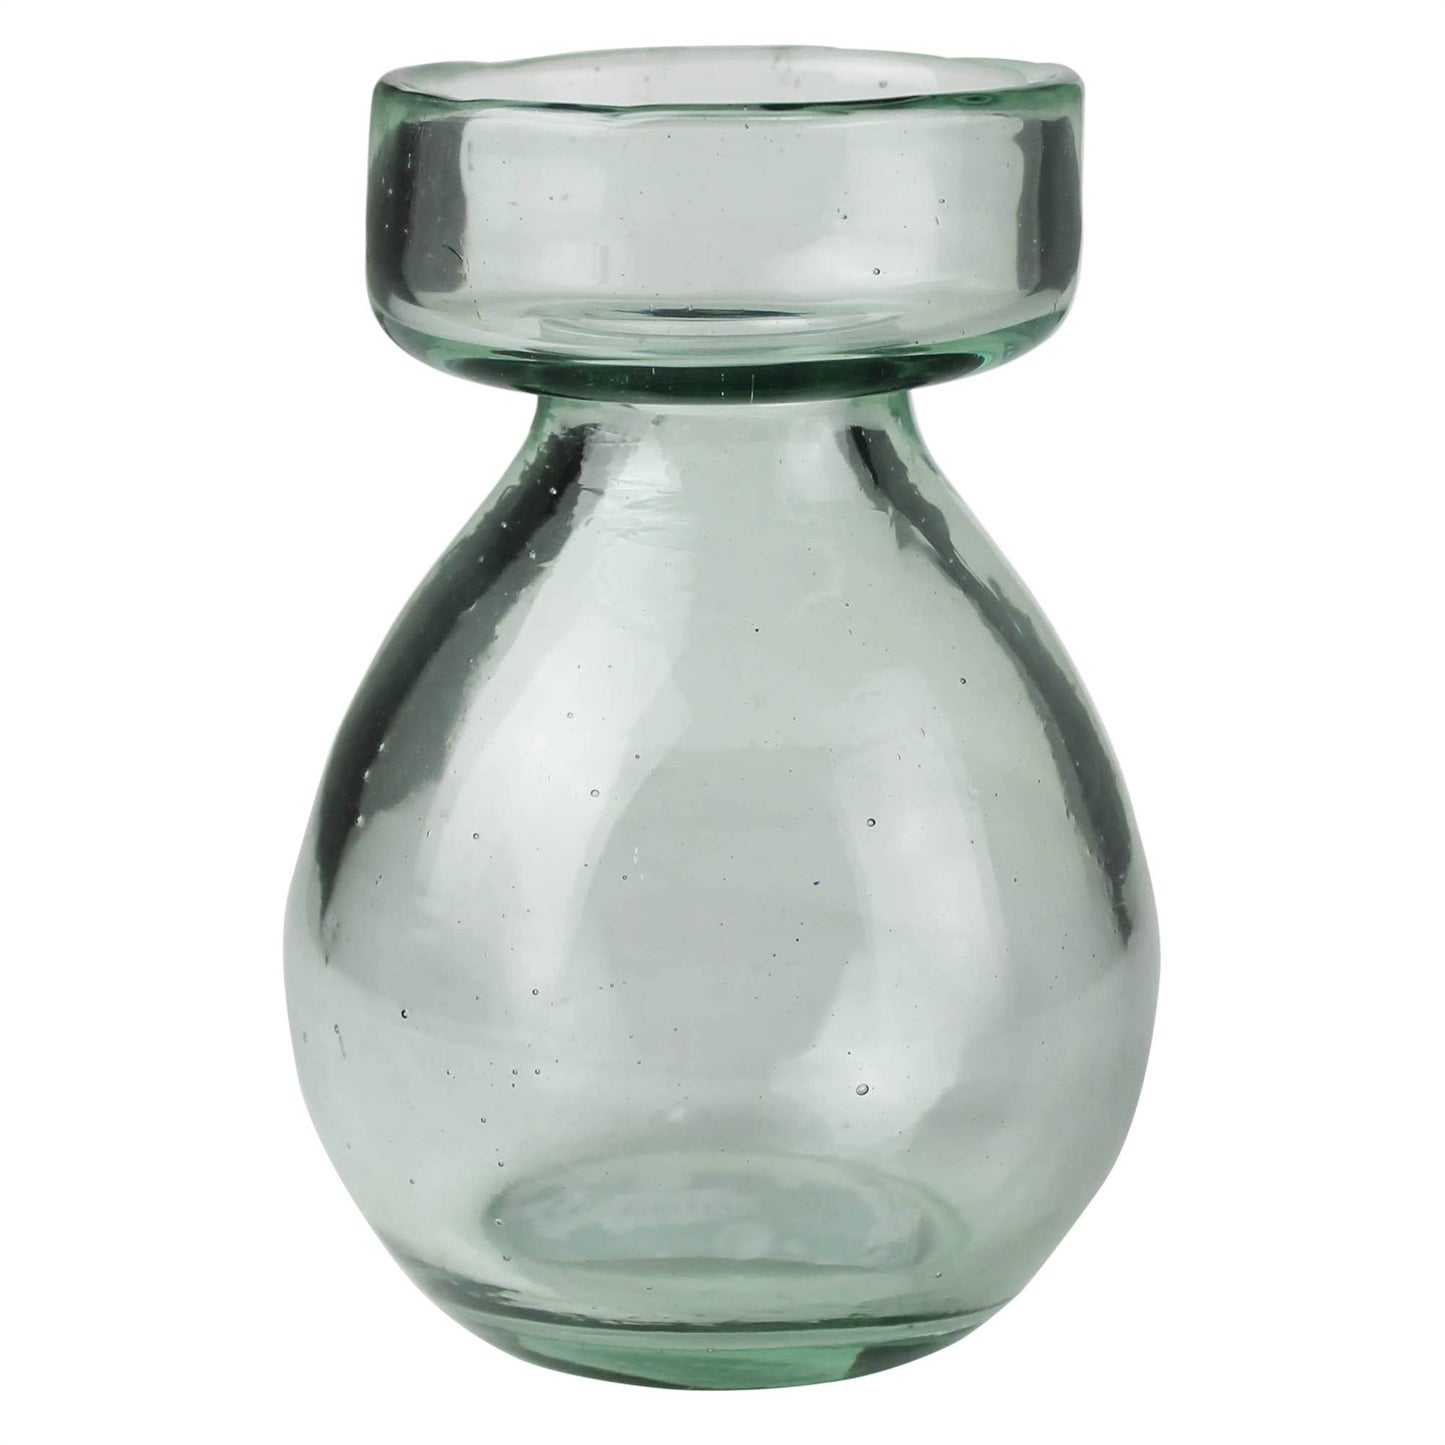 Bulb Vase - Recycled Clear